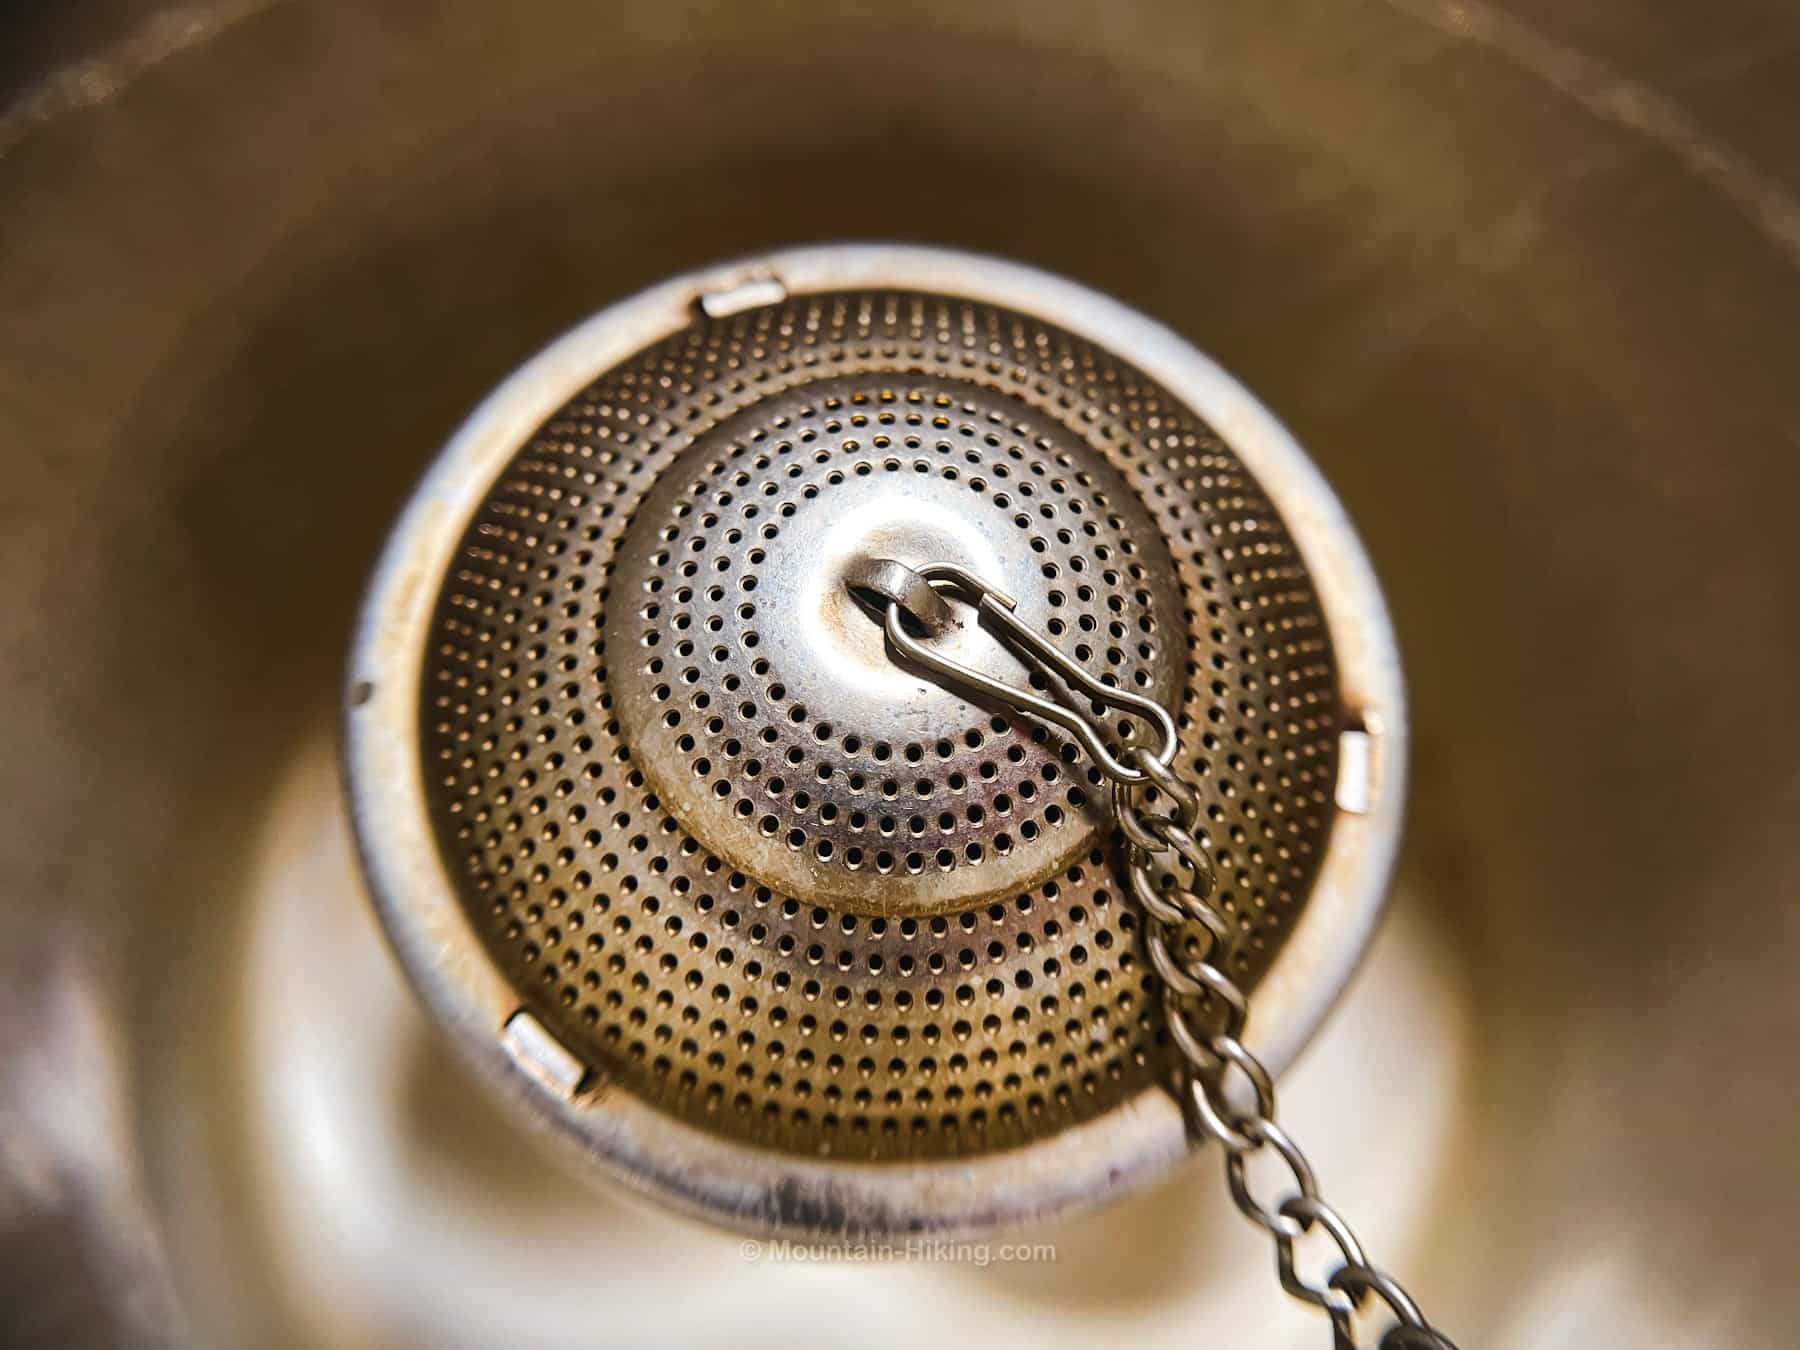 strainer in cup